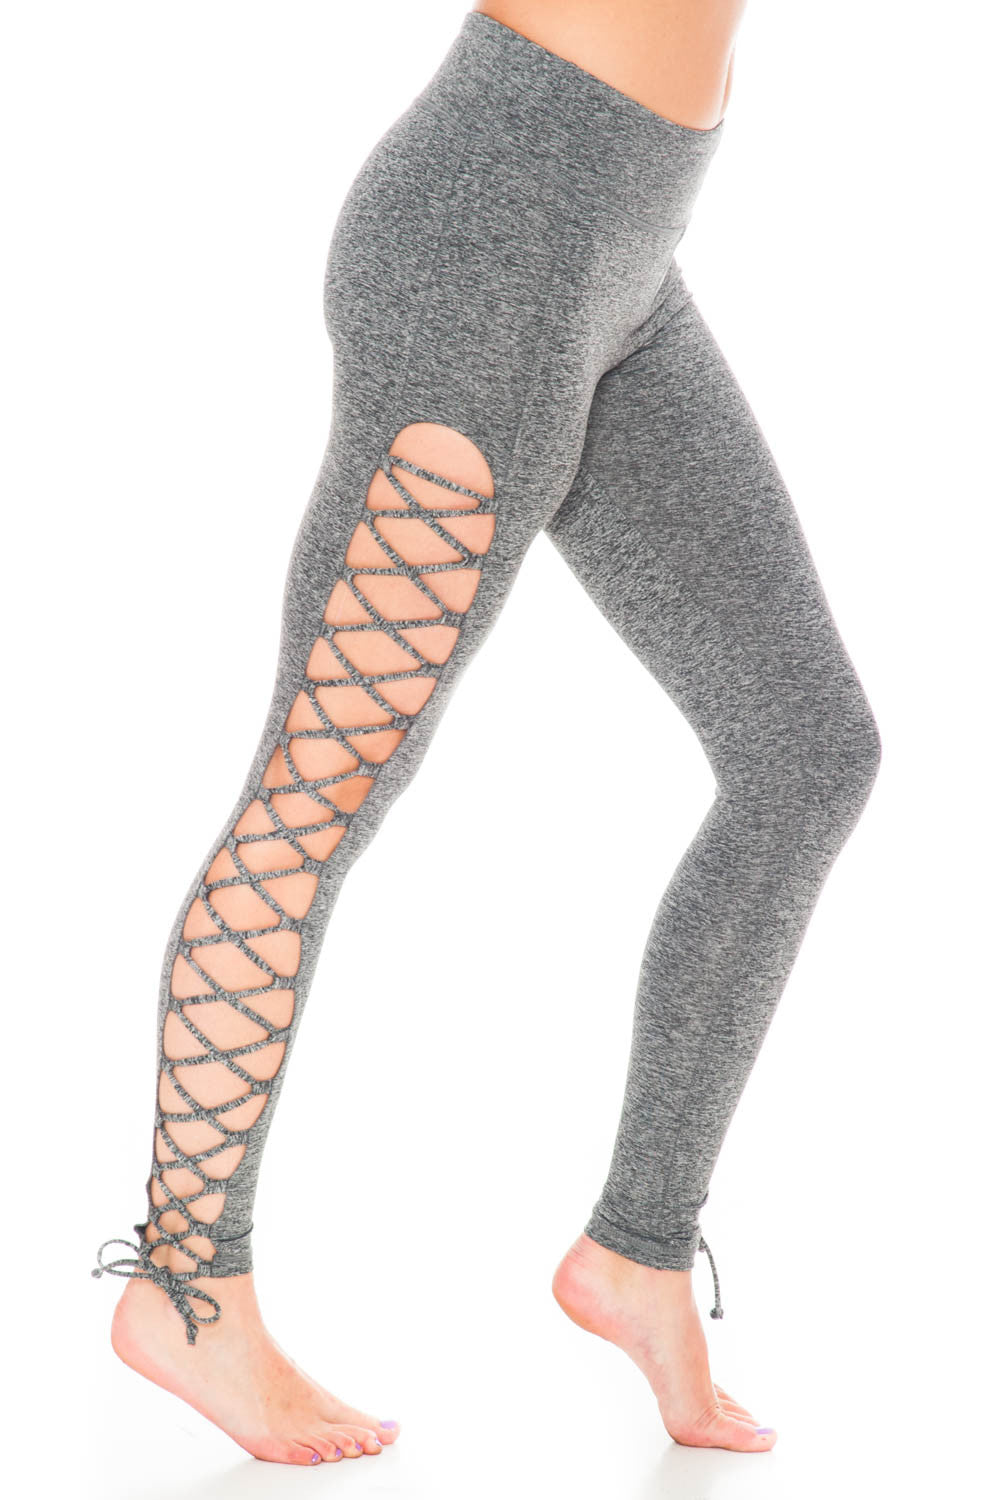 Legging - Lace Up Side Yoga Pant by Motion by Coalition